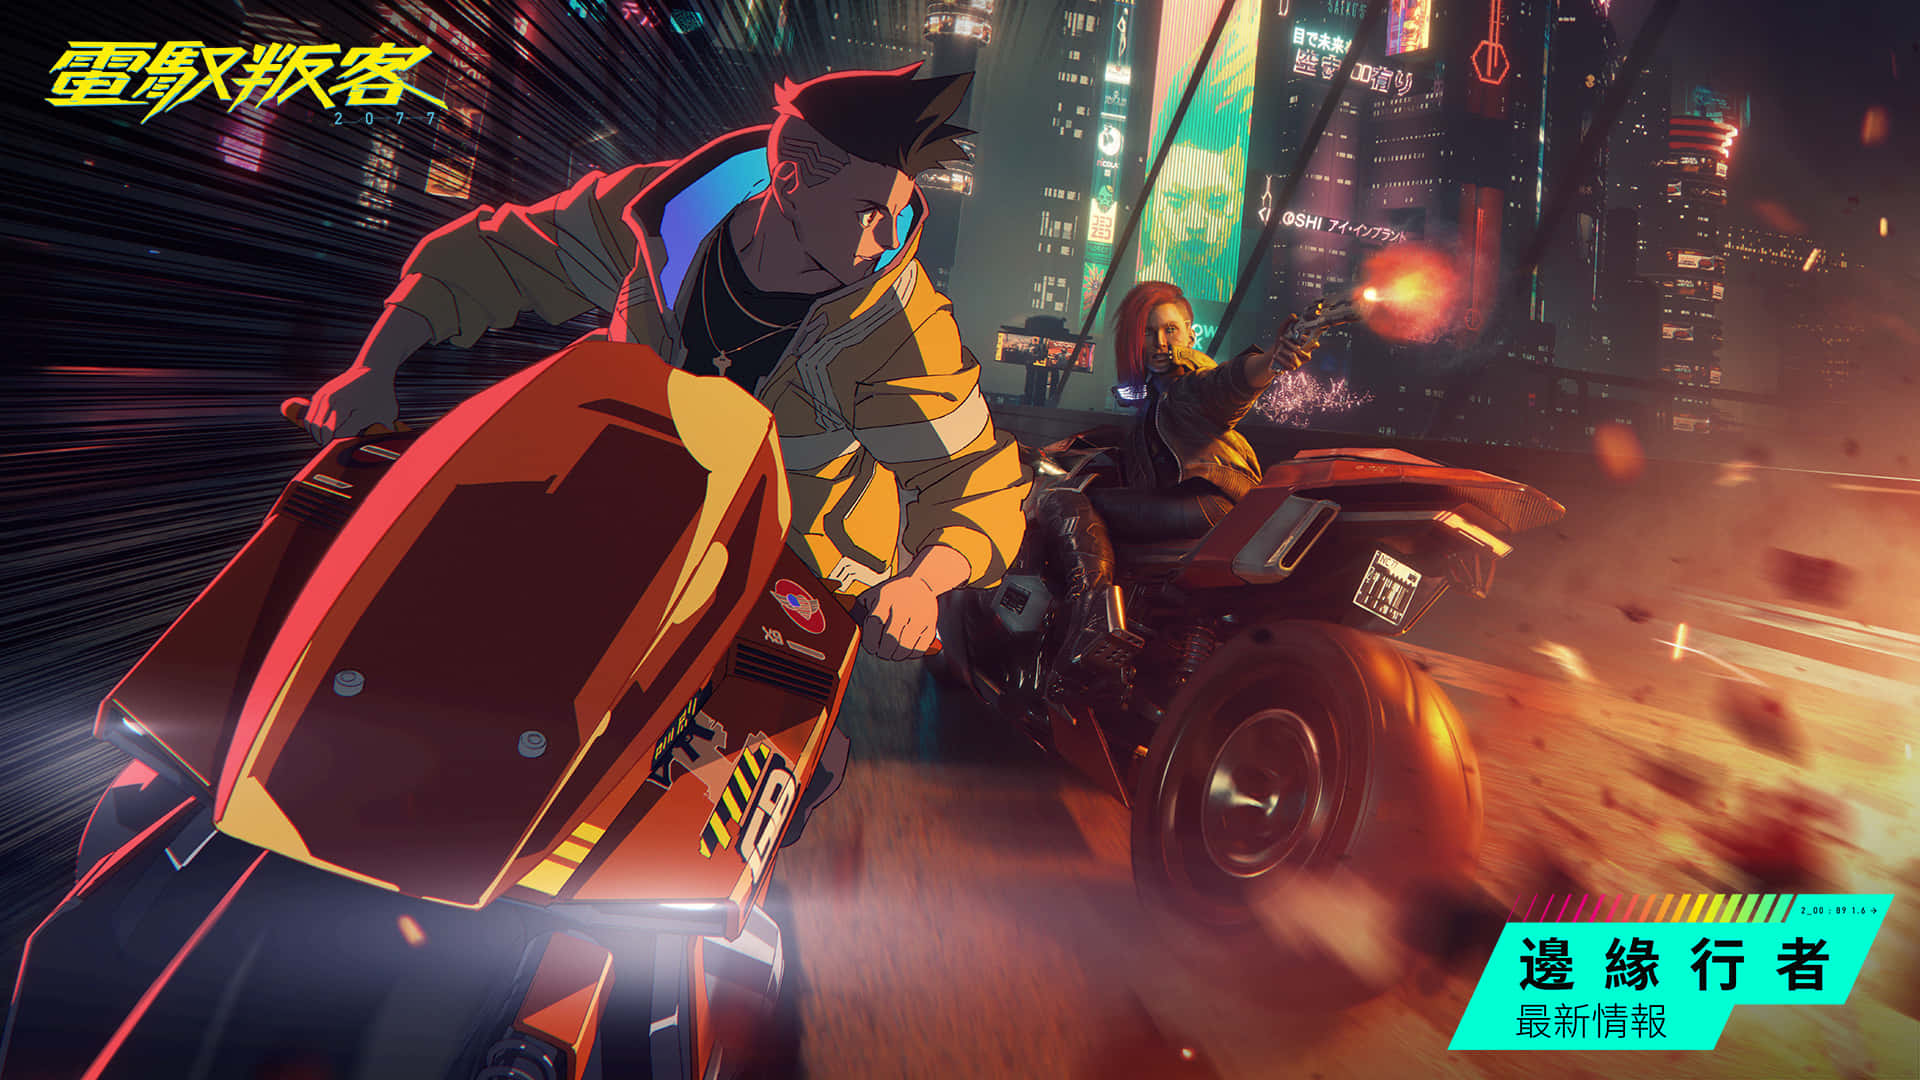 Journey into Night City and explore a neon-lit adventure in 1080p Cyberpunk 2077